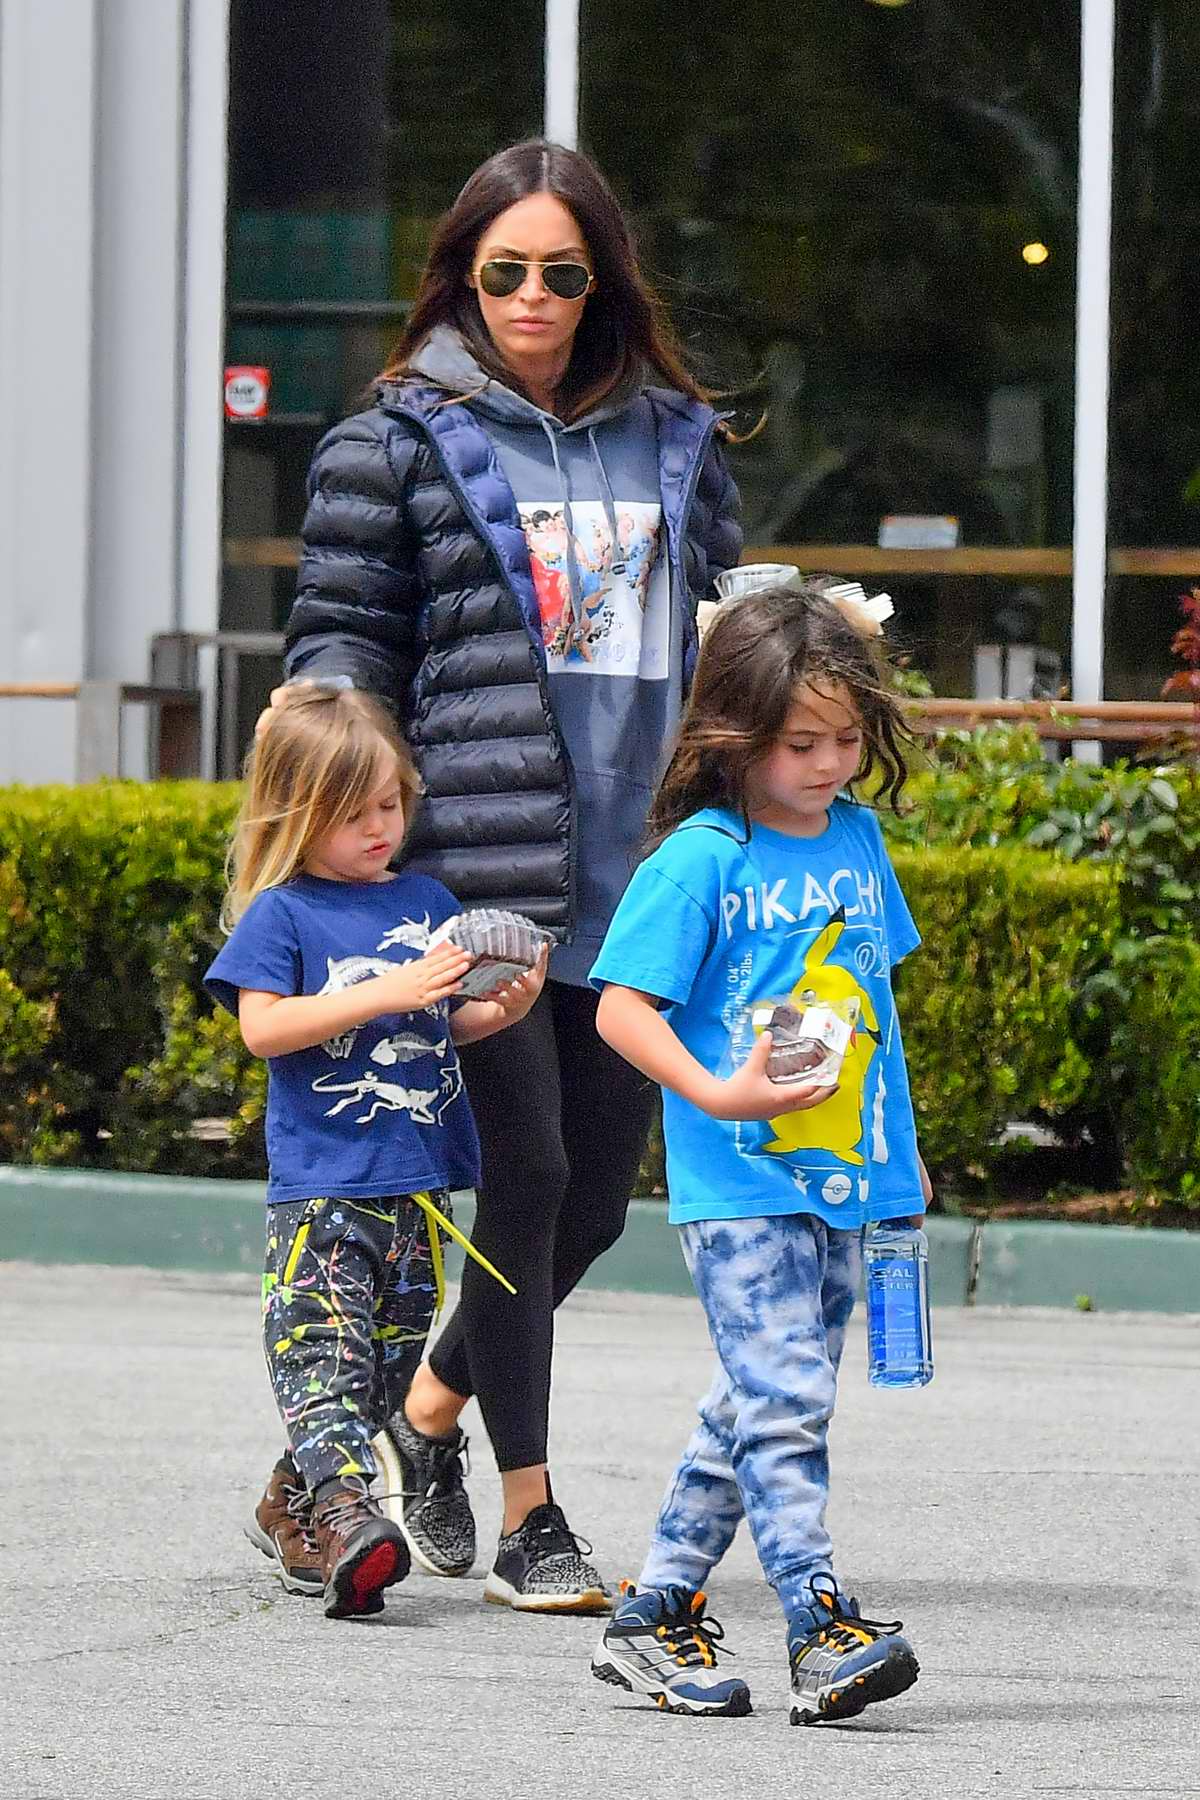 Megan Fox and Brian Austin Green take their kids to a grocery store for